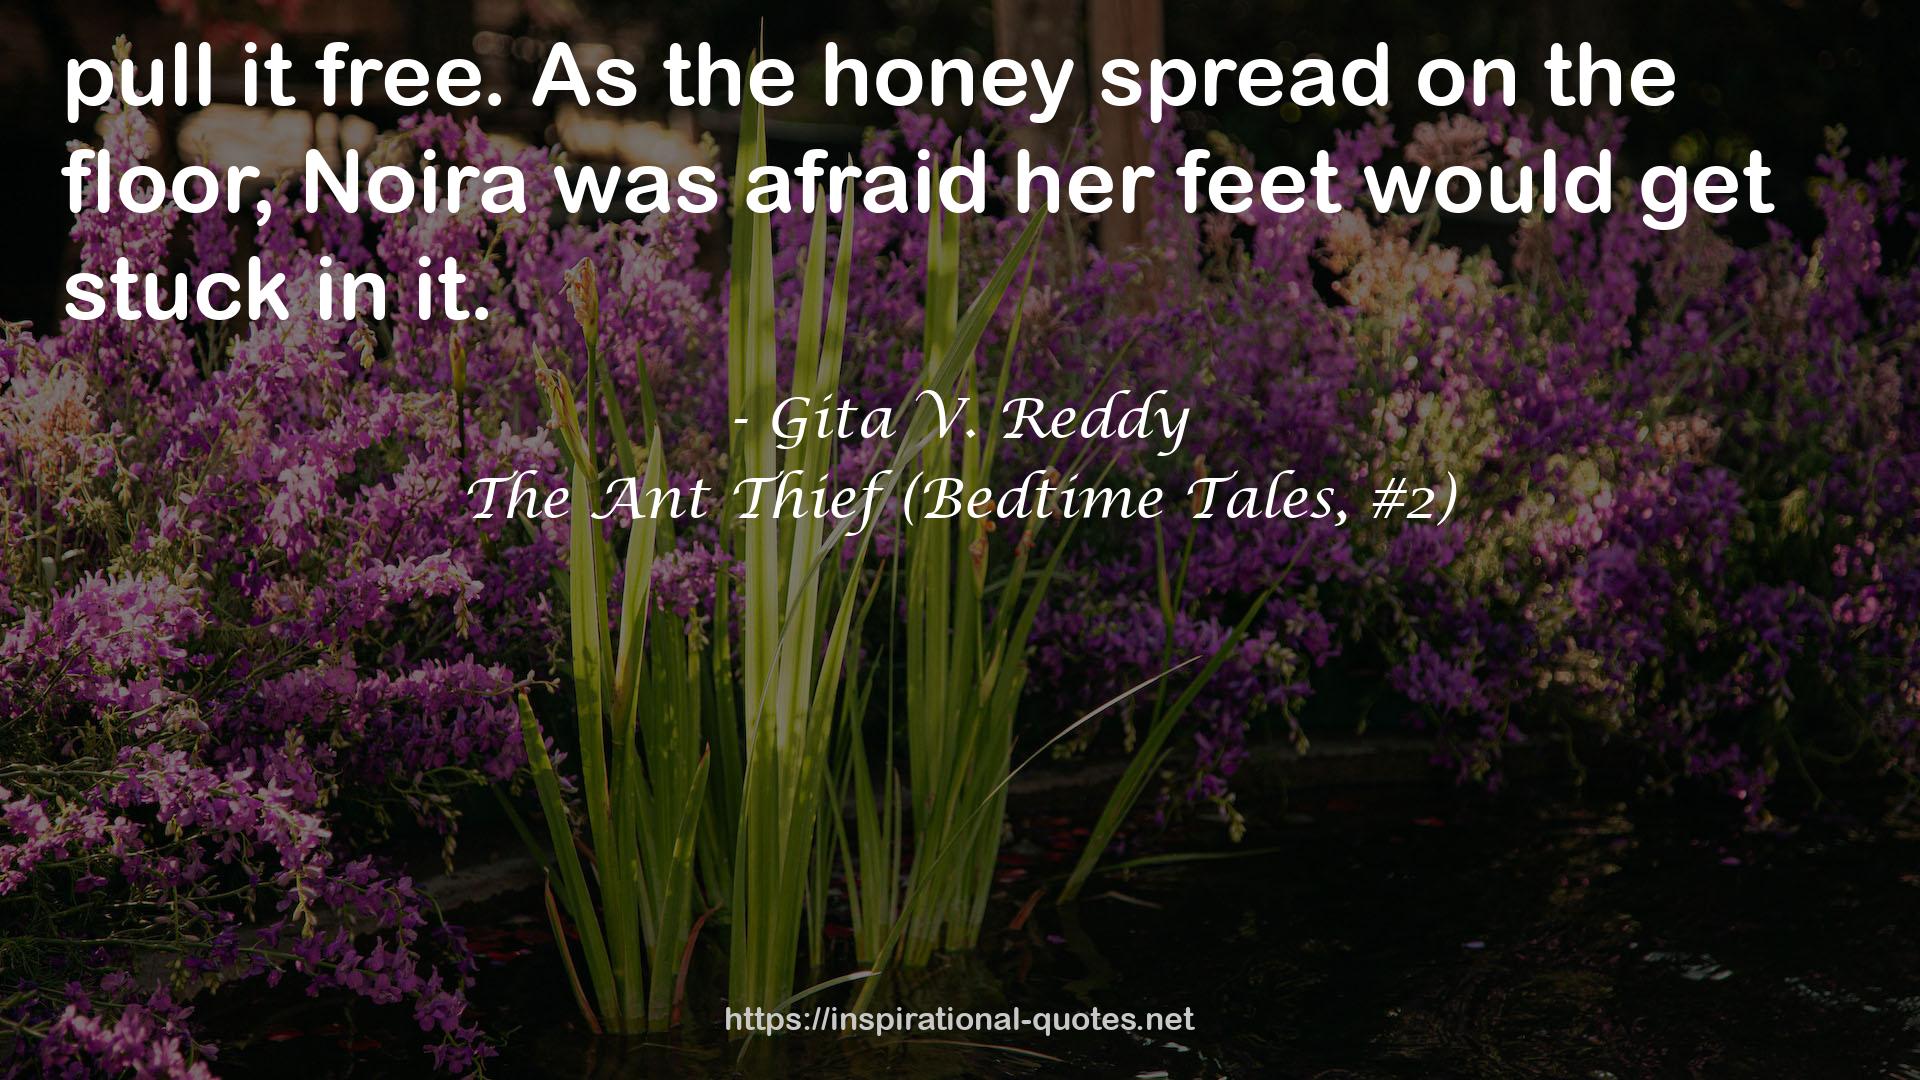 The Ant Thief (Bedtime Tales, #2) QUOTES